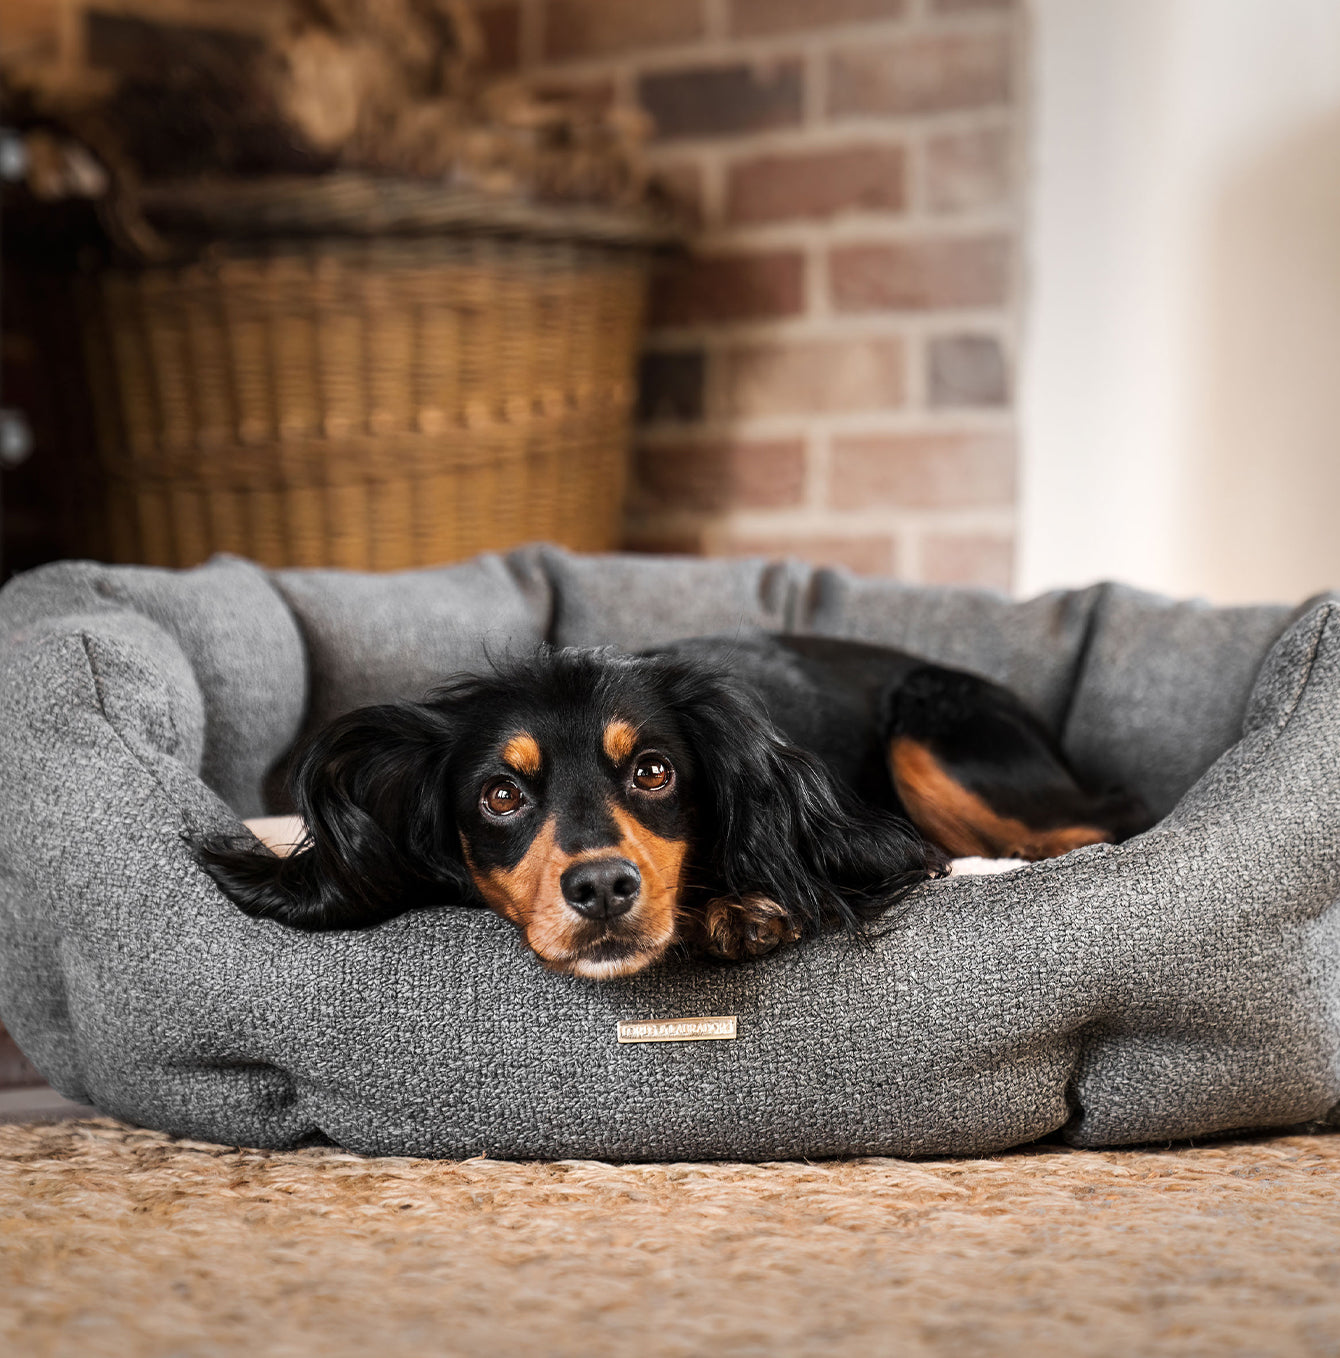 Discover our luxury Herdwick oval dog bed in beautiful graphite, the ideal choice for dogs to enjoy blissful nap-time, featuring reversible inner cushion with raised sides for dogs who love to rest their head for the ultimate cosiness! Handcrafted in Italy for pure pet luxury! Available now at Lords & Labradors    